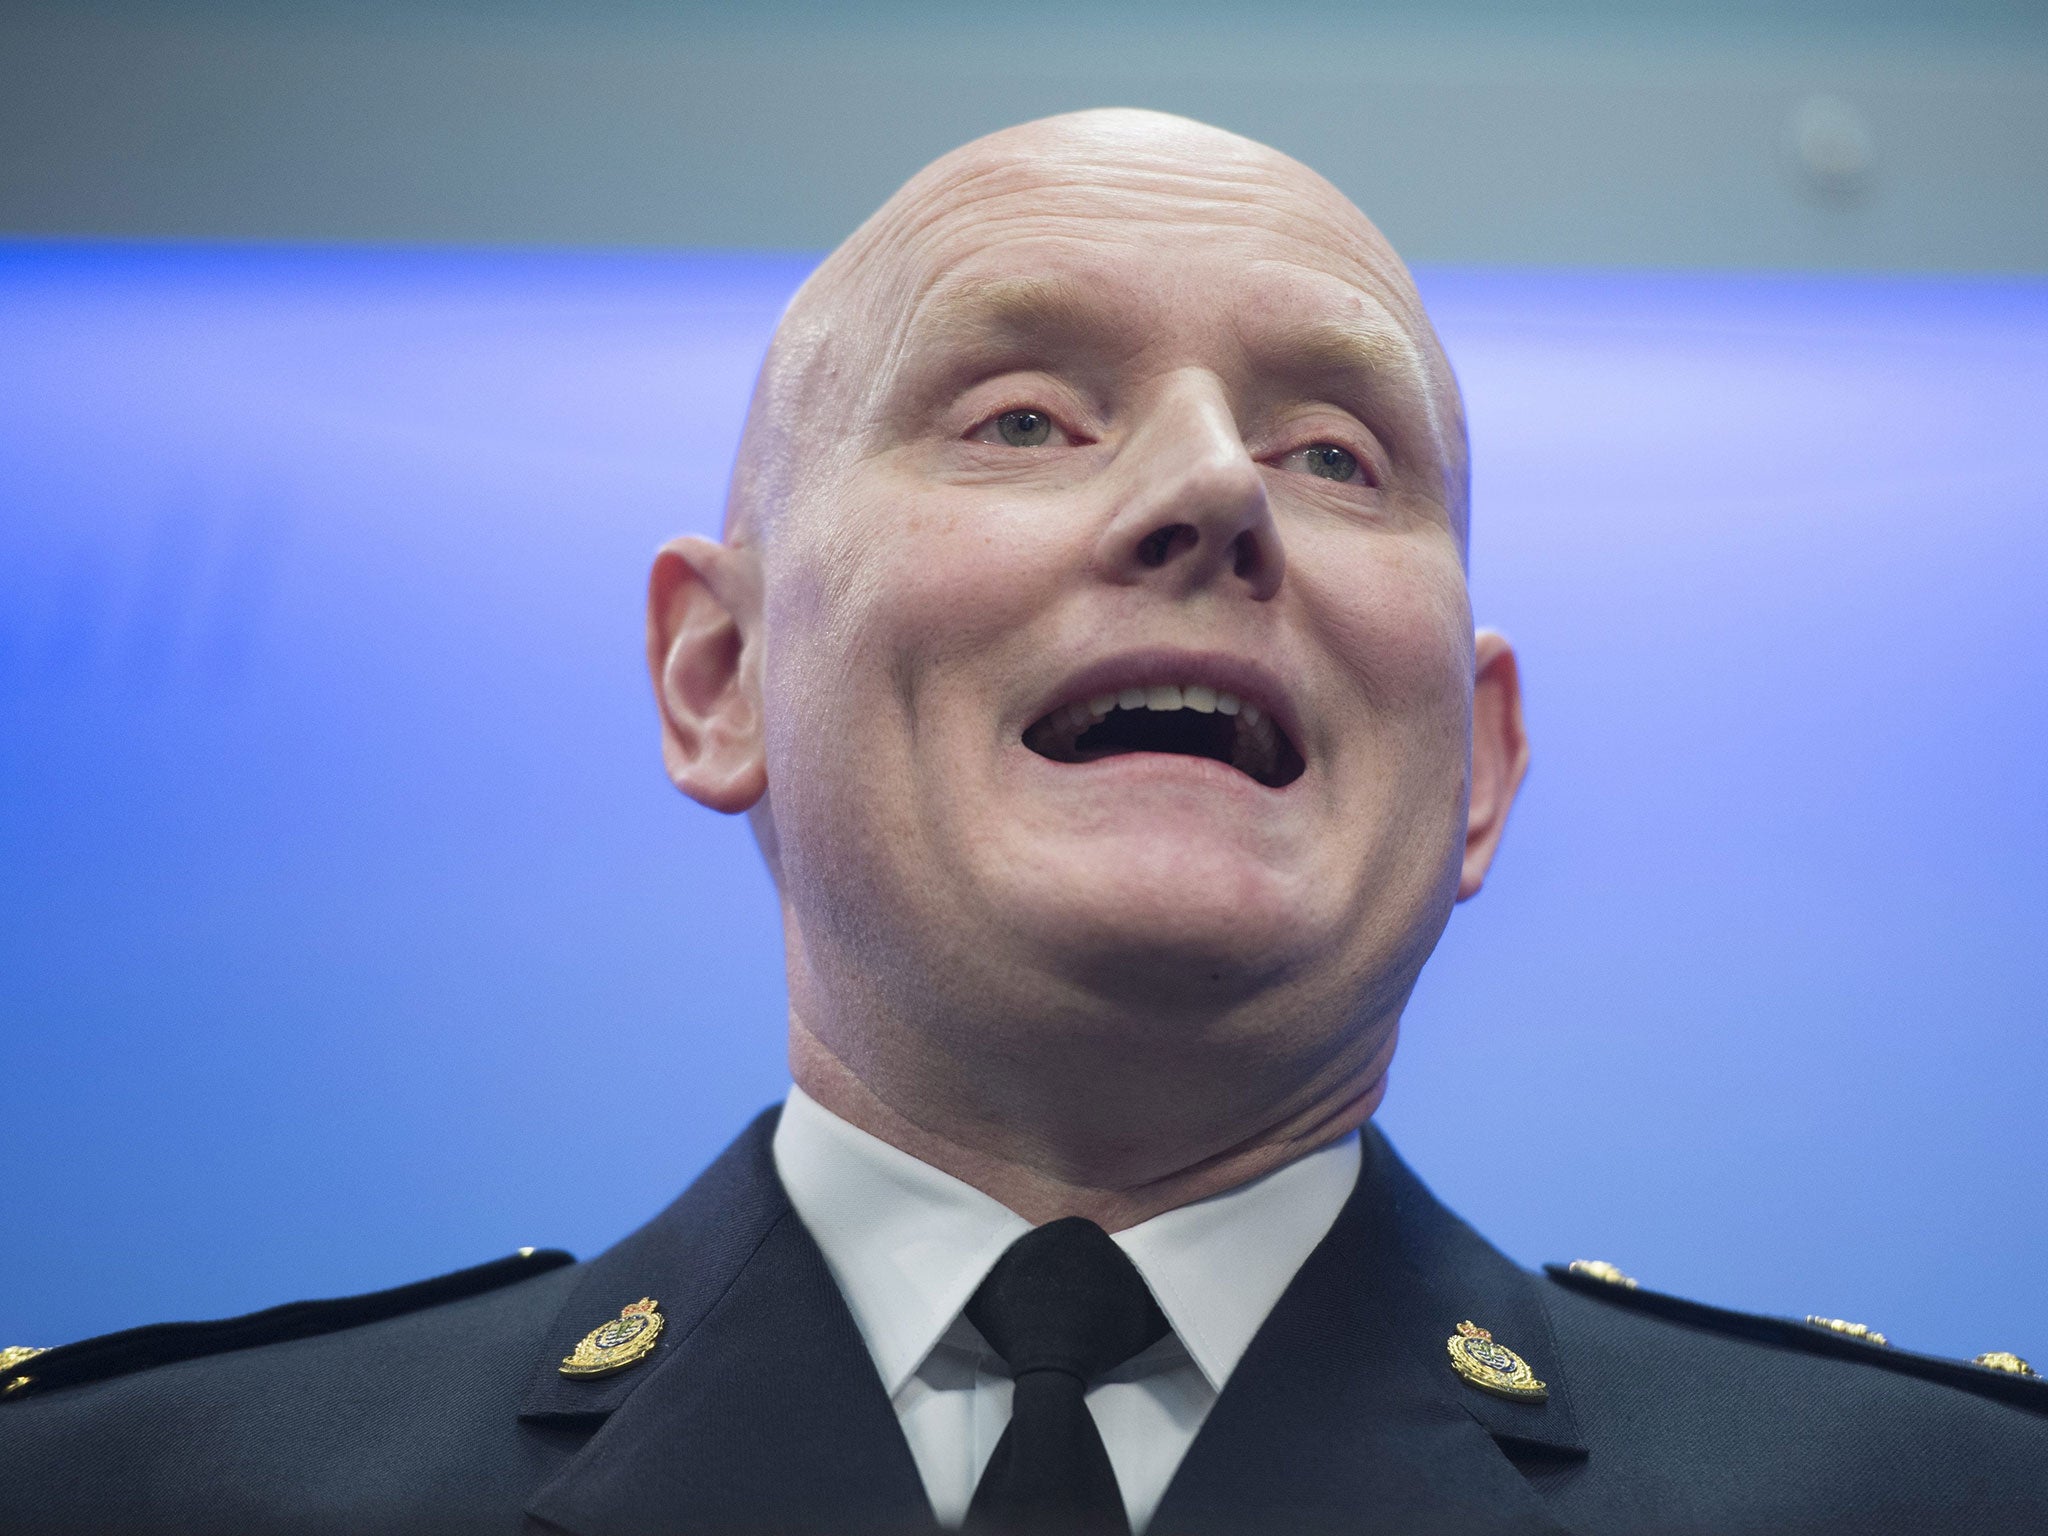 Vancouver Chief Constable Adam Palmer speaks during a news conference on an apparent hate crime against newly-arrived Syrians on 9 January 2016